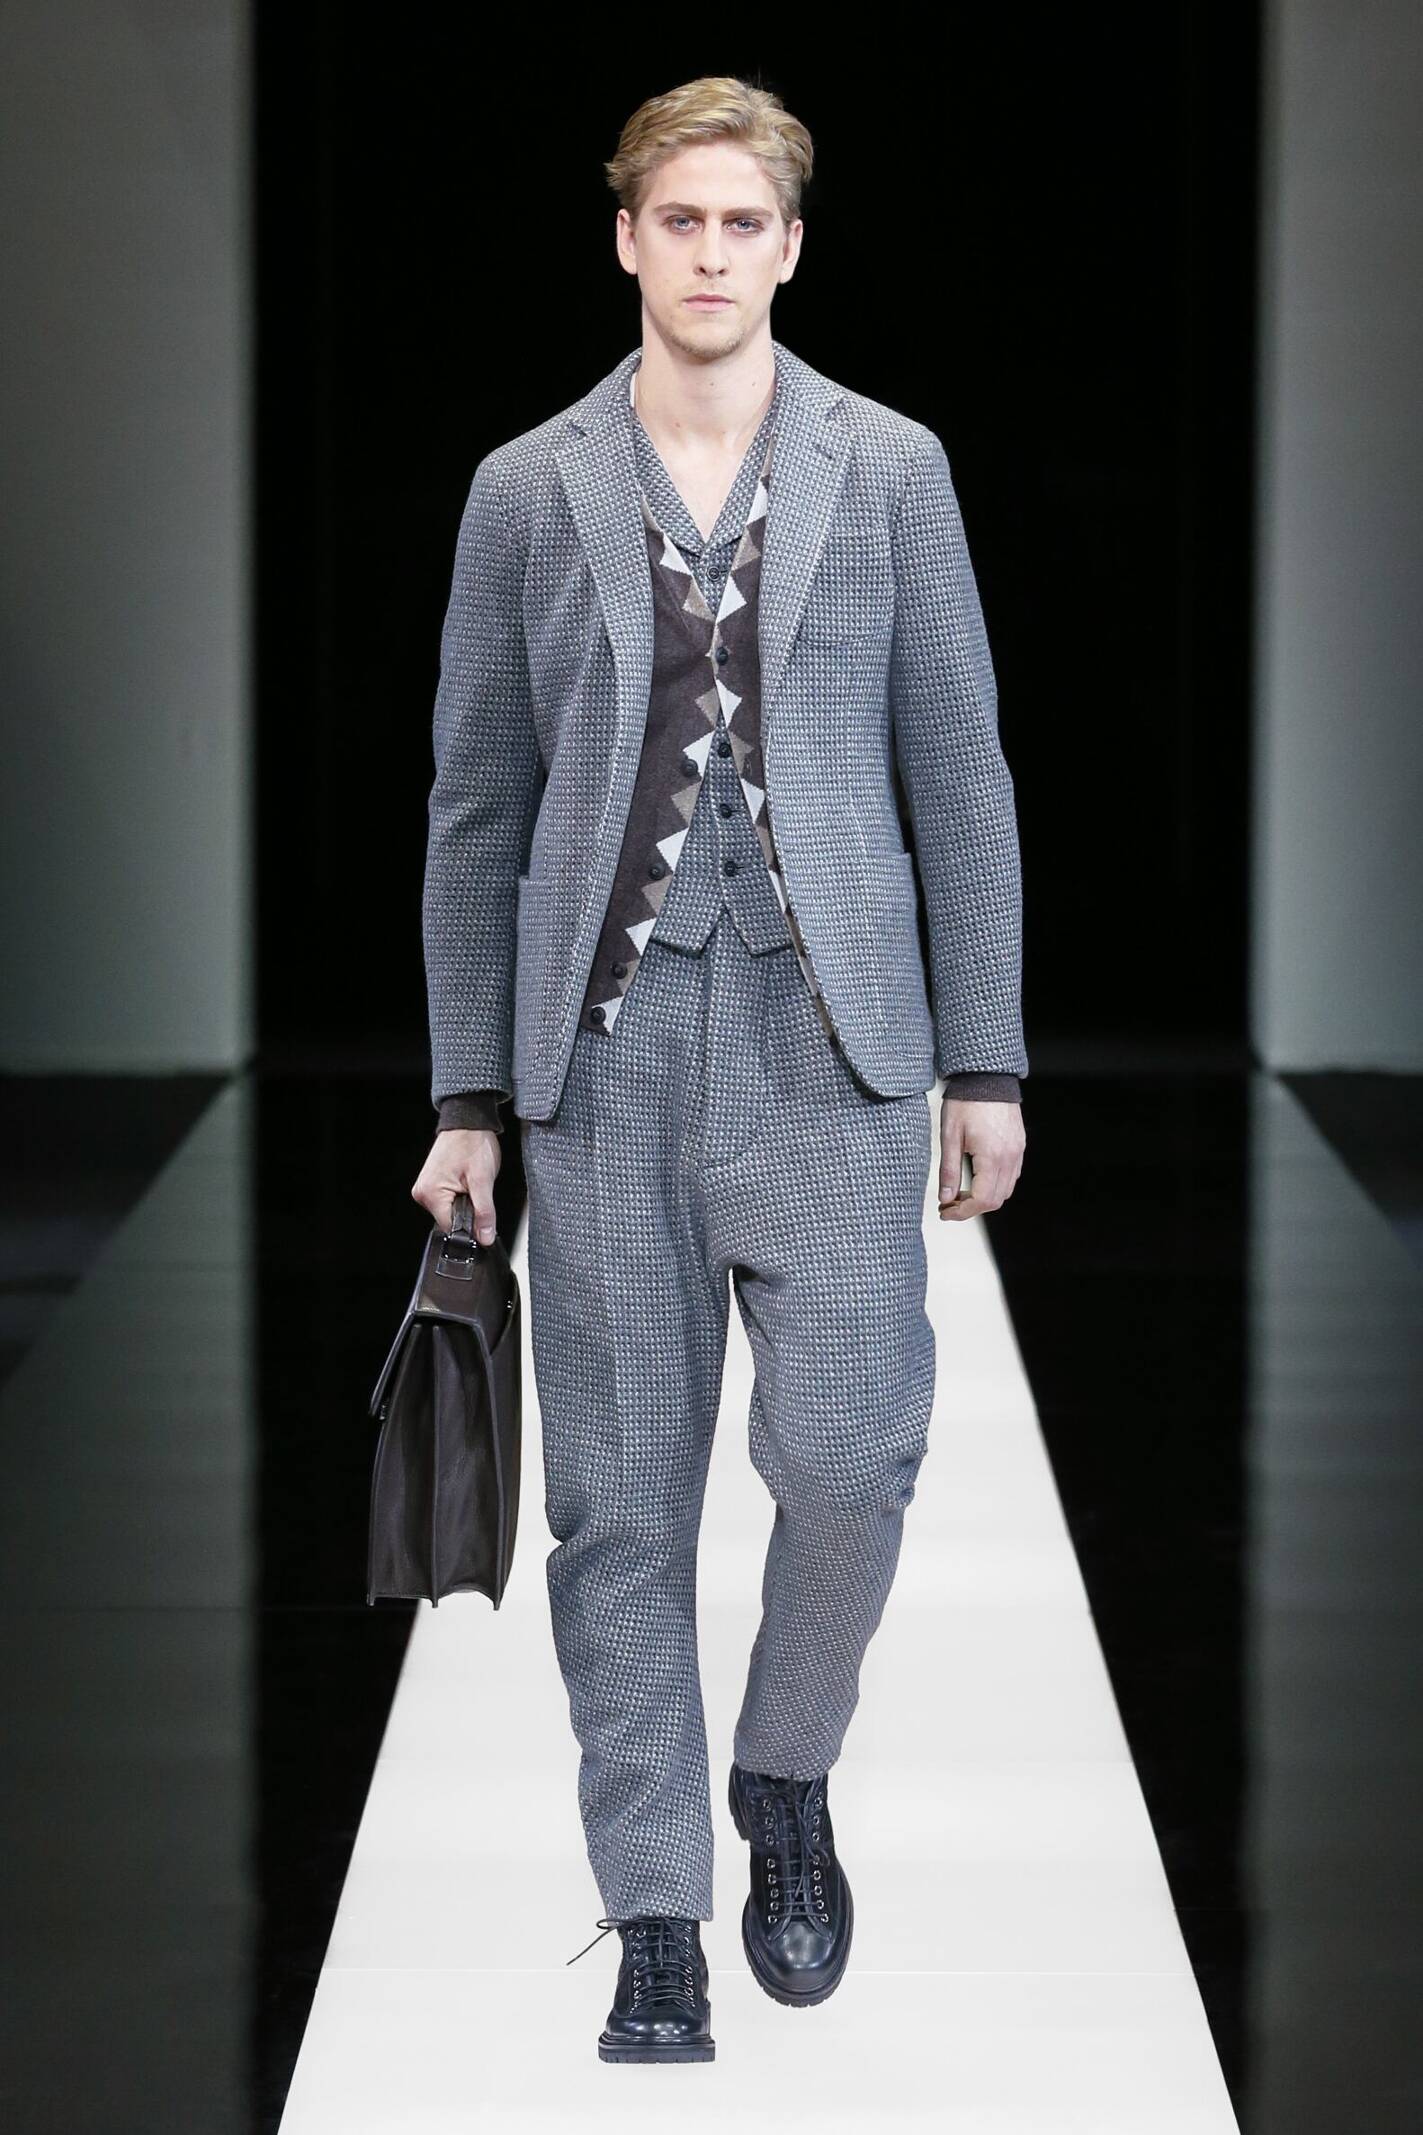 armani outfit mens